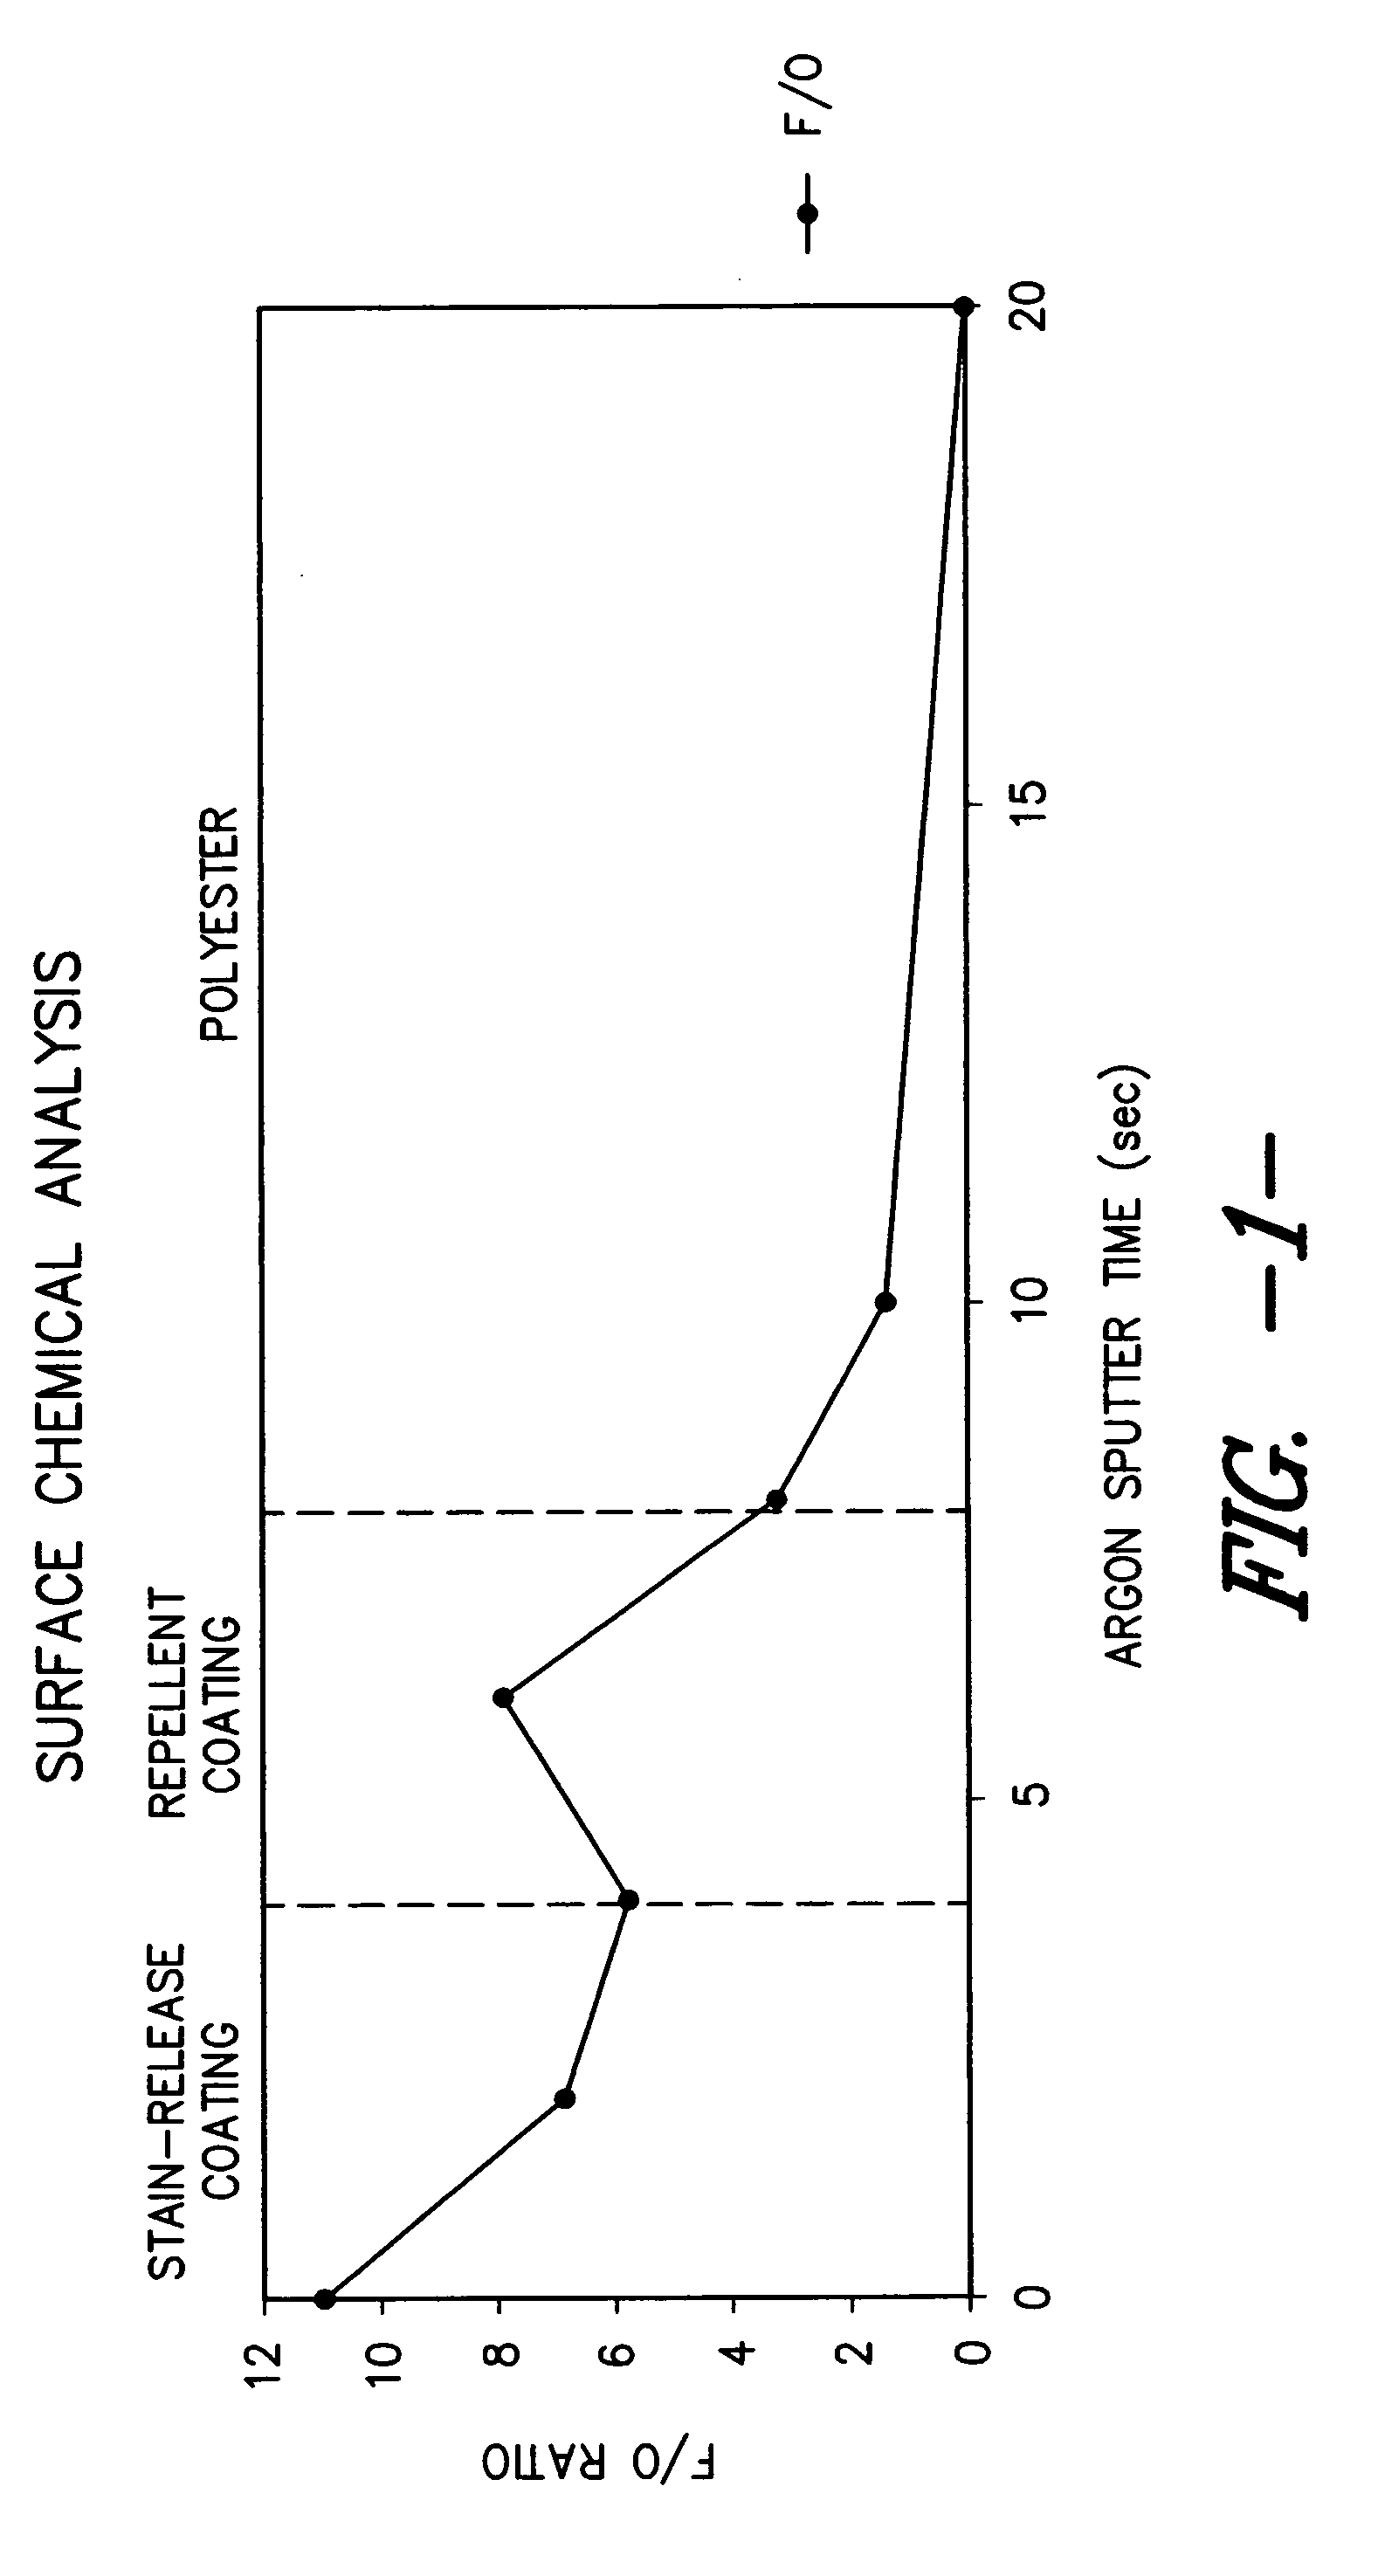 Method for making textile substrates having layered finish structure for improving liquid repellency and stain release